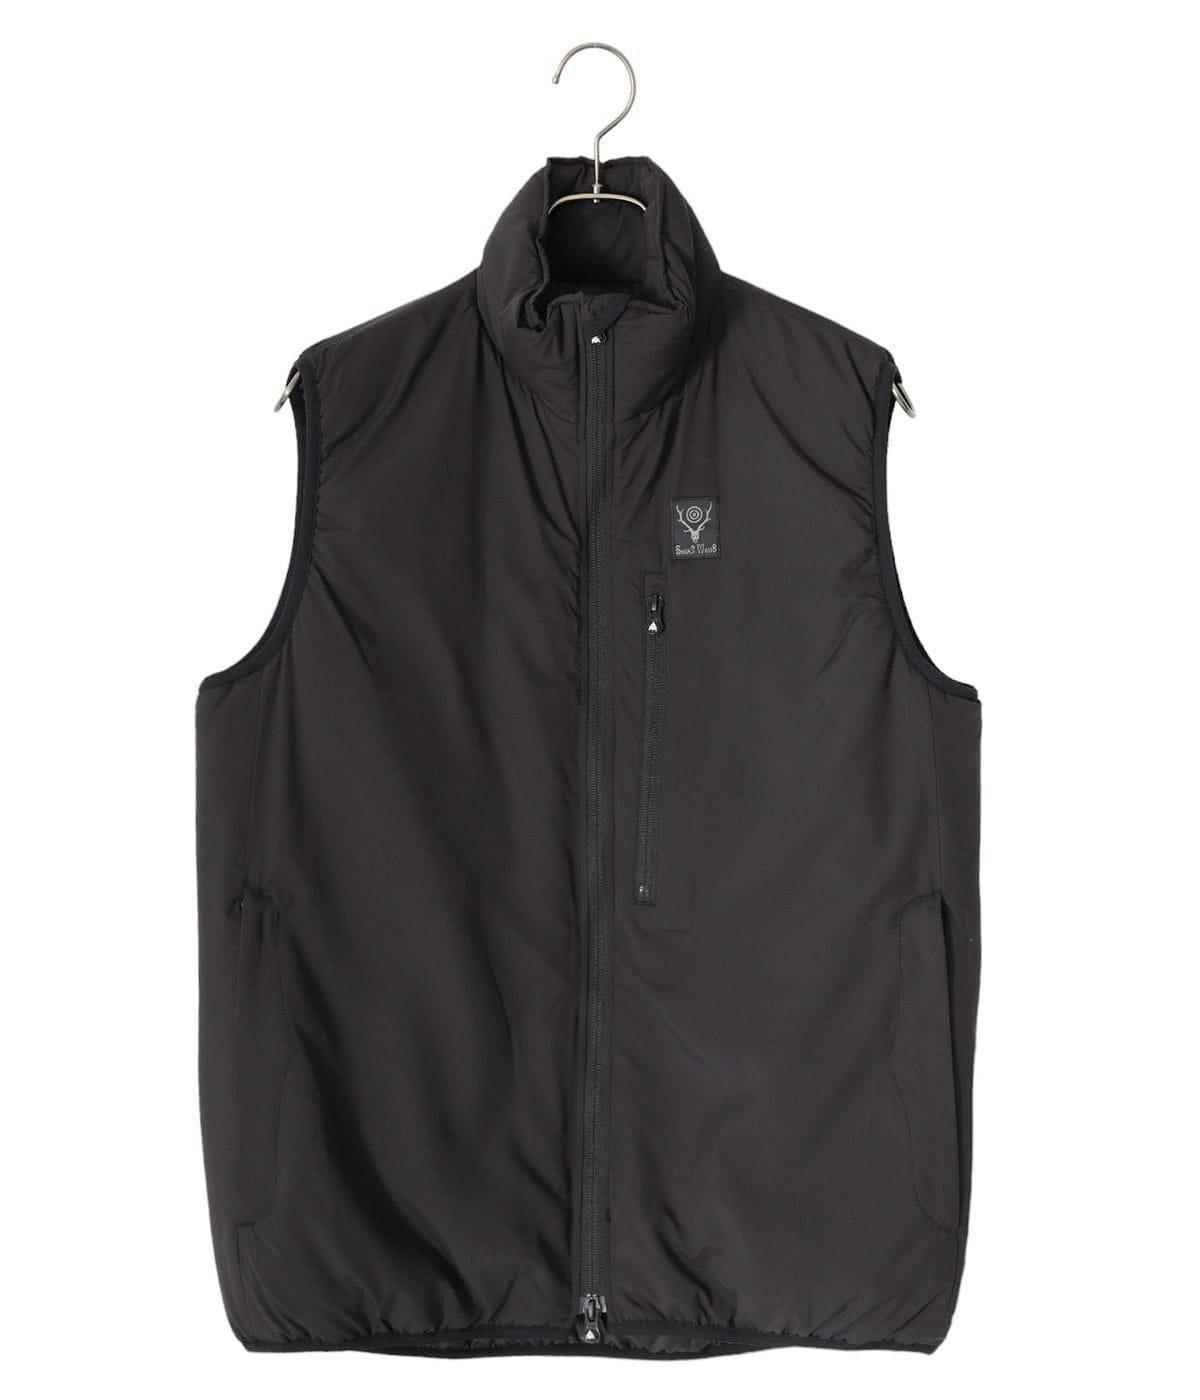 Insulator Vest - Poly Peach Skin | South2 West8(サウスツー